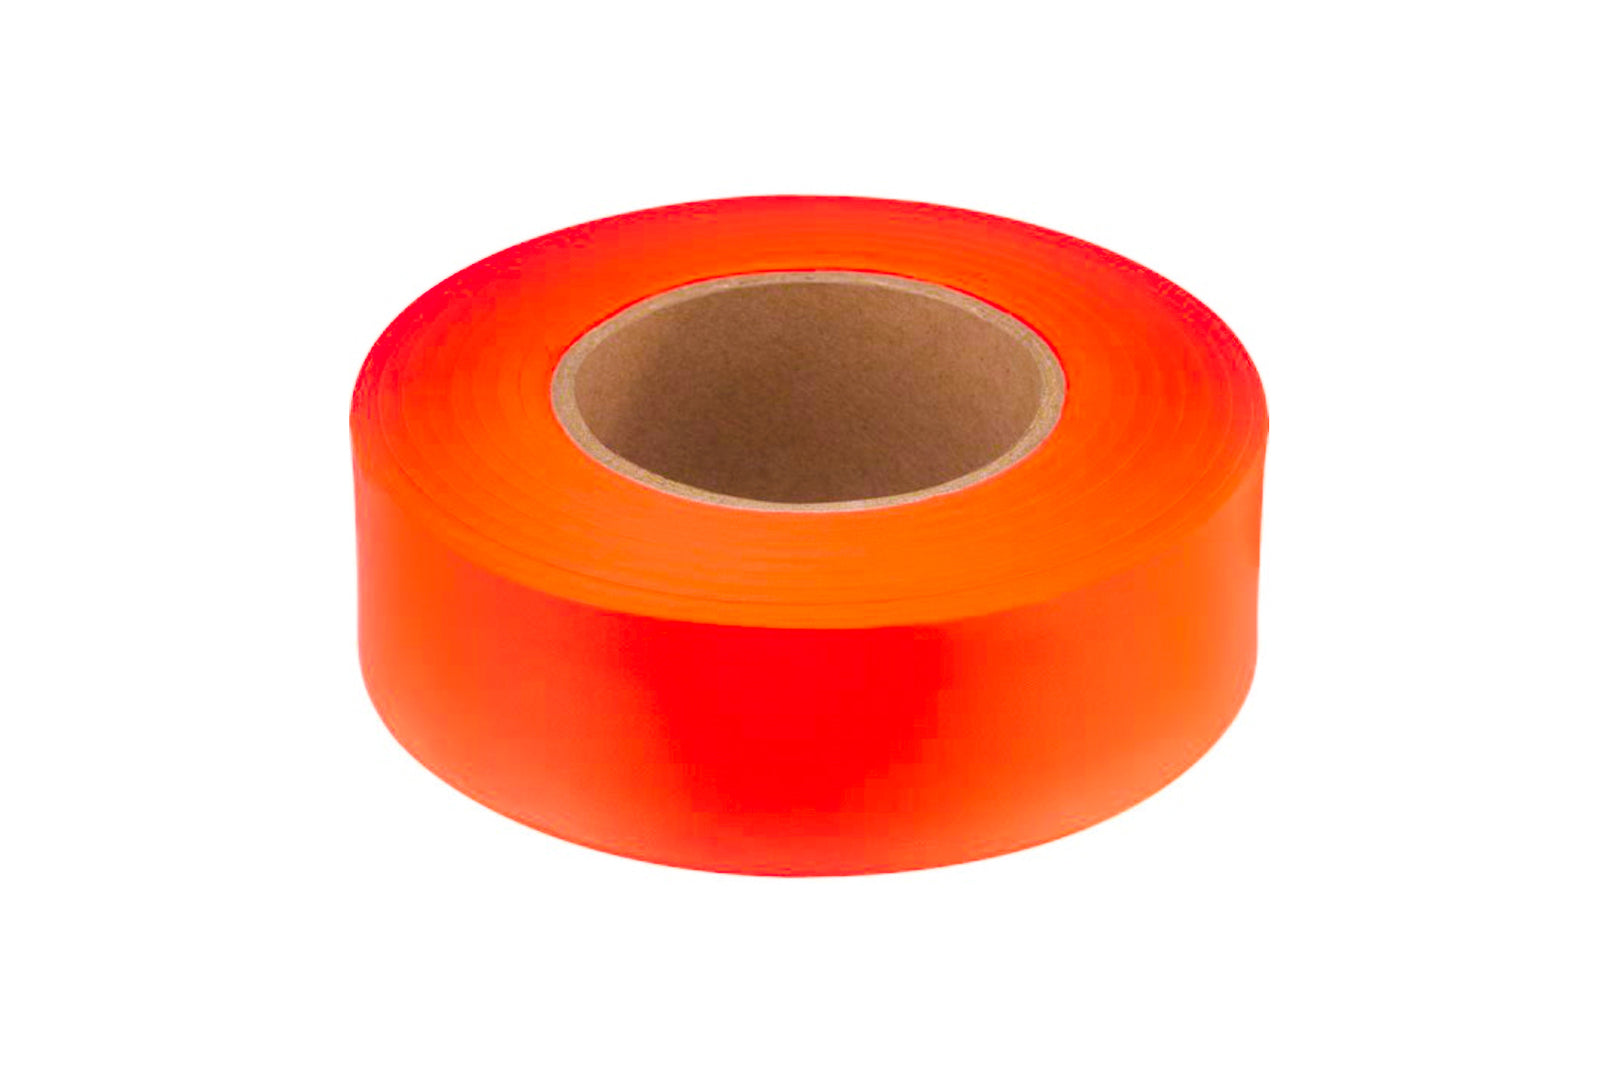 This Empire Fluorescent Orange Color Flagging Tape 1" x 200' is durable plastic tape that remains pliant in cold weather. Easy to tear & tie off. Tape is ideal for surveying projects, marking trails, & similar tasks, etc.  Model 77-002. 015812770027